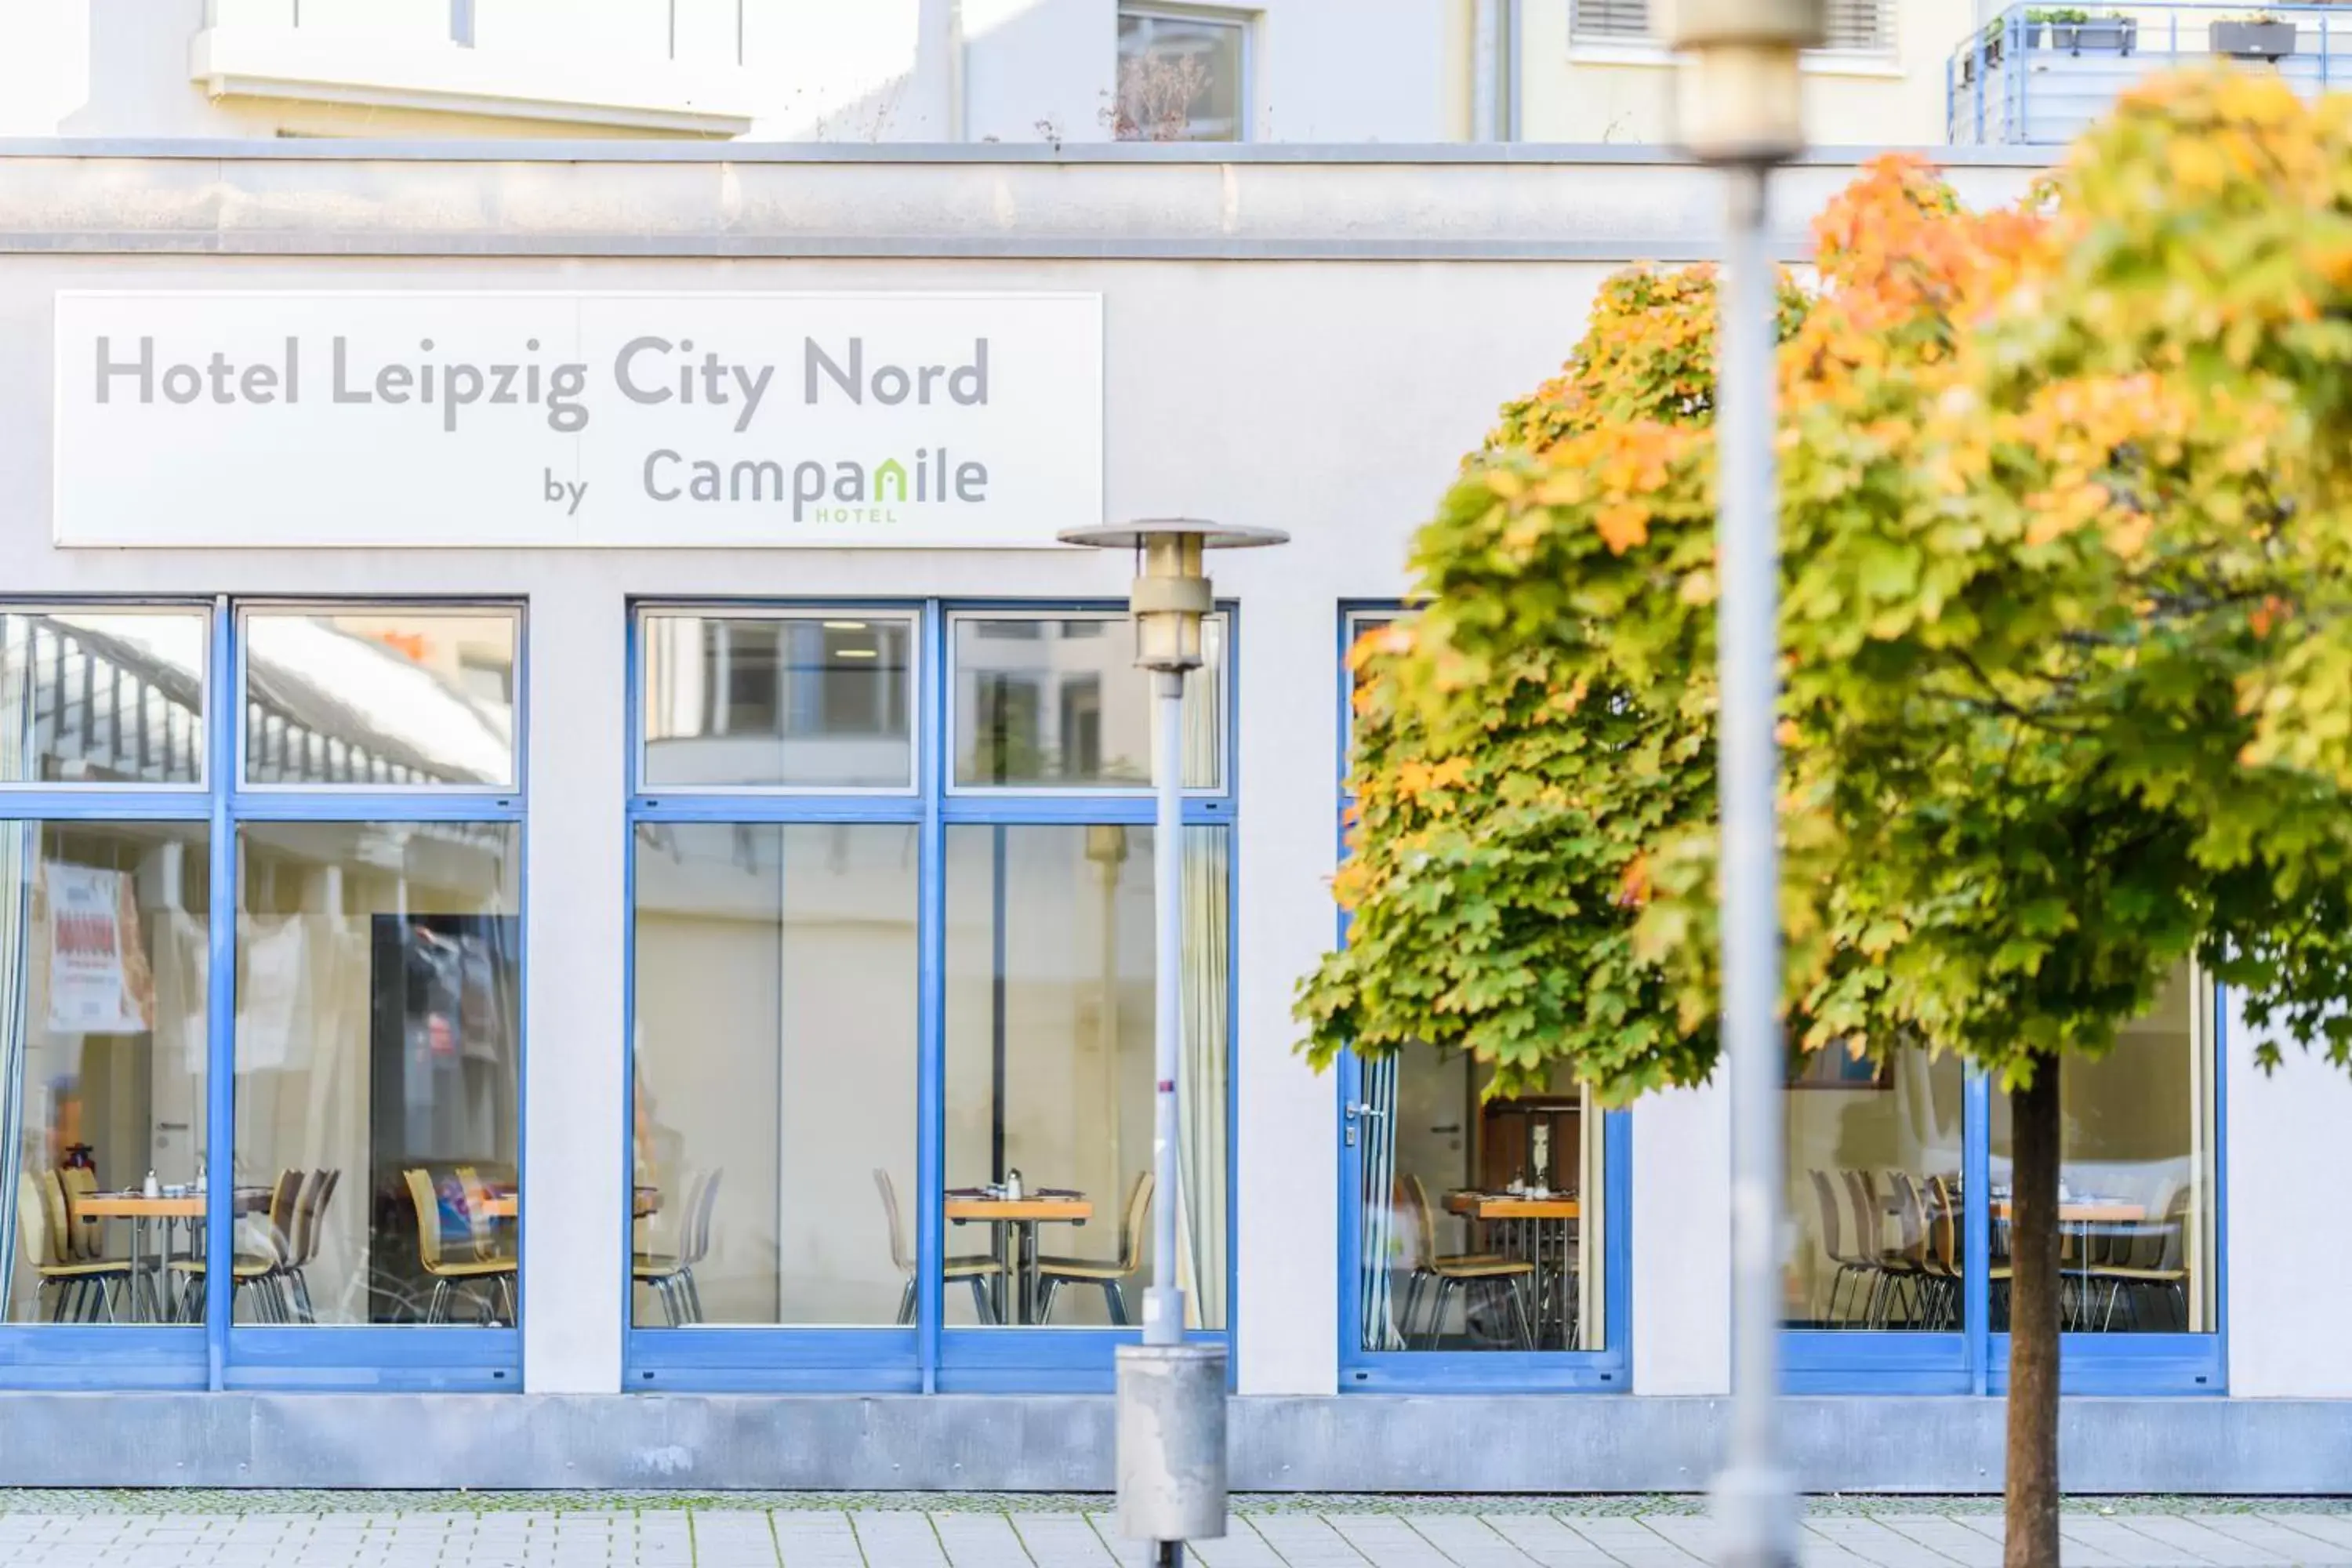 Property Building in Hotel Leipzig City Nord by Campanile